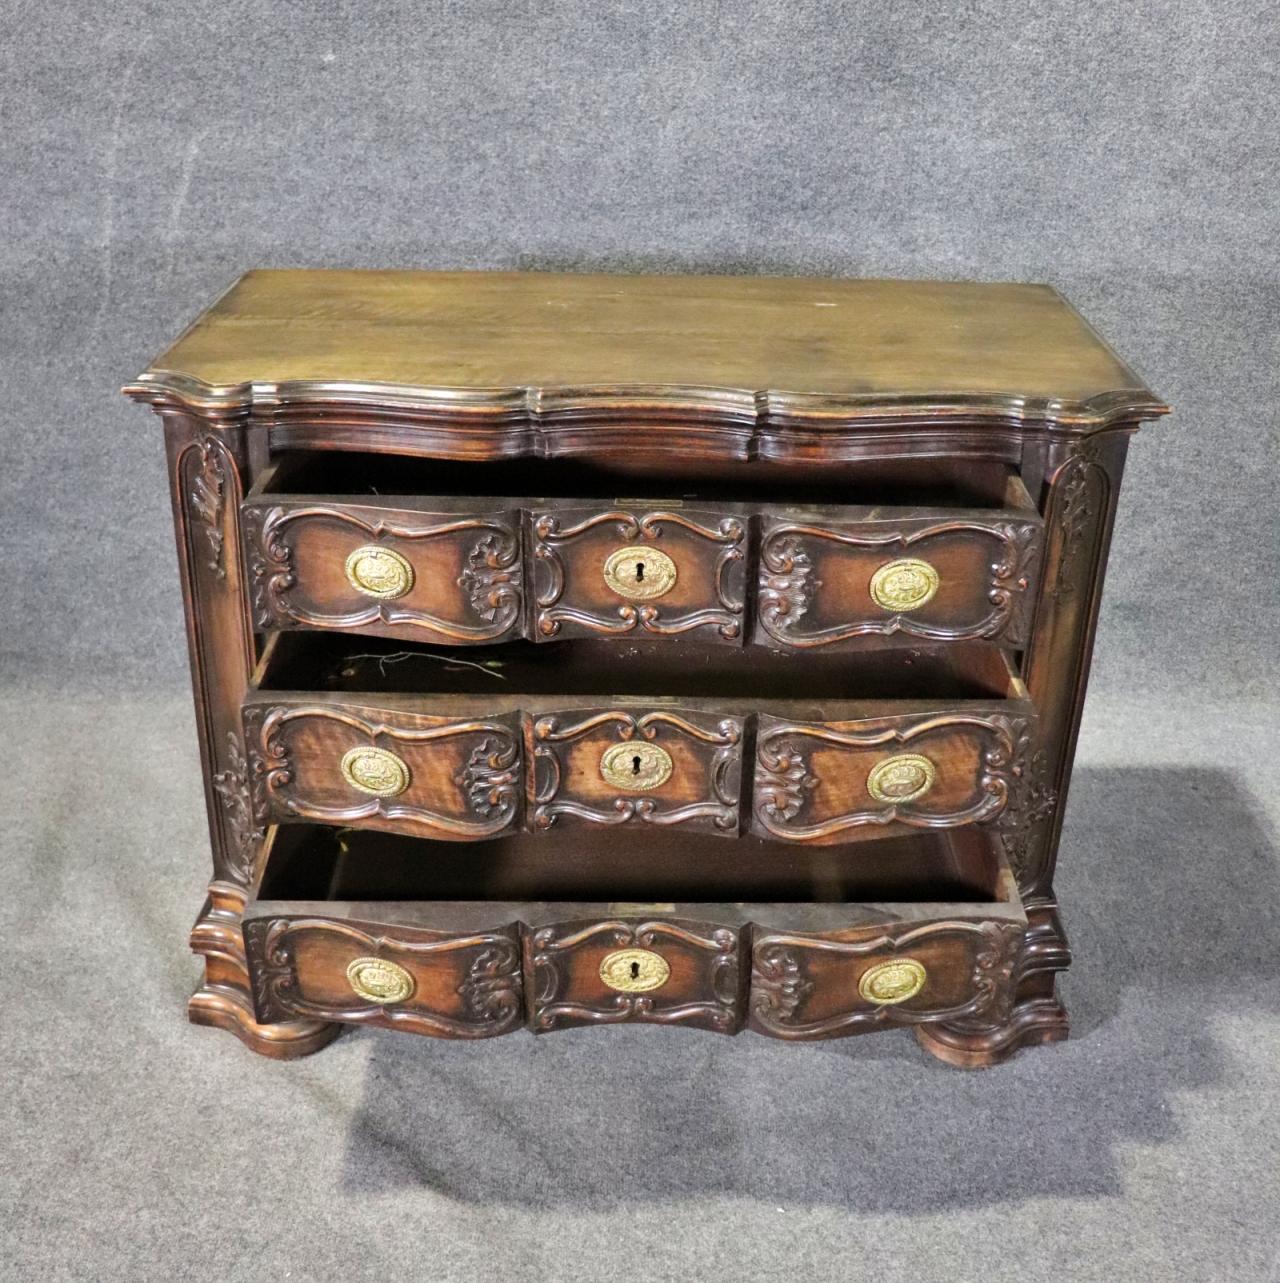 Sensational Portuguese Style Carved Walnut and Brass Commode Chest of Drawers For Sale 1